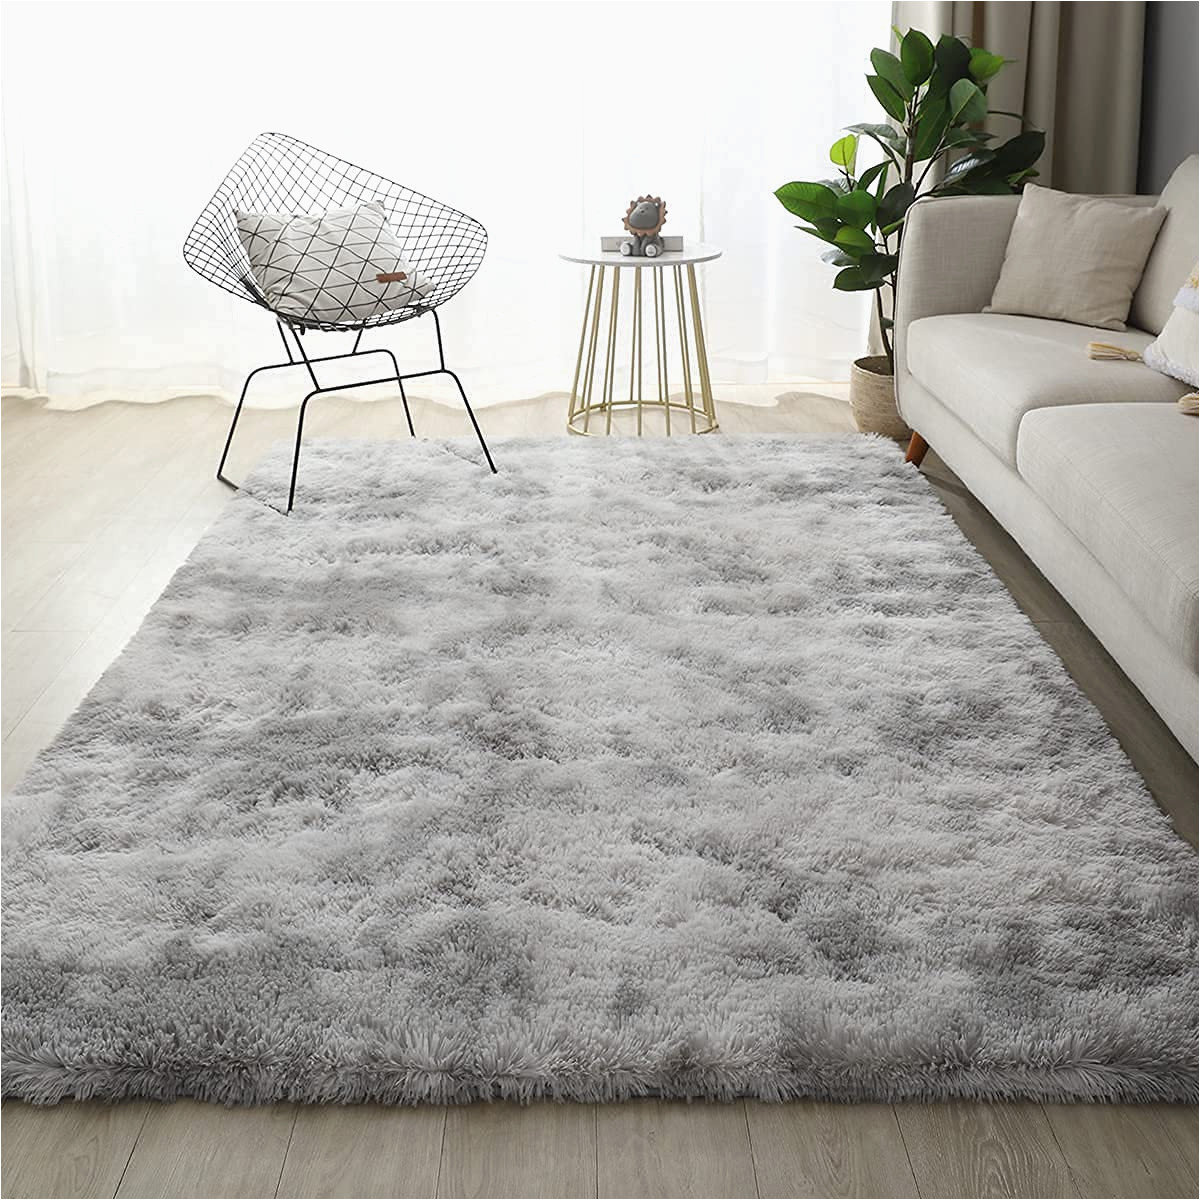 4×6 area Rugs for Sale Ultra soft Fluffy area Rugs for Bedroom 4×6, Shaggy Bedroom Carpet, Plush Living Room Shag Furry Floor Rugs, Non-slip Tie-dyed Floor Carpet